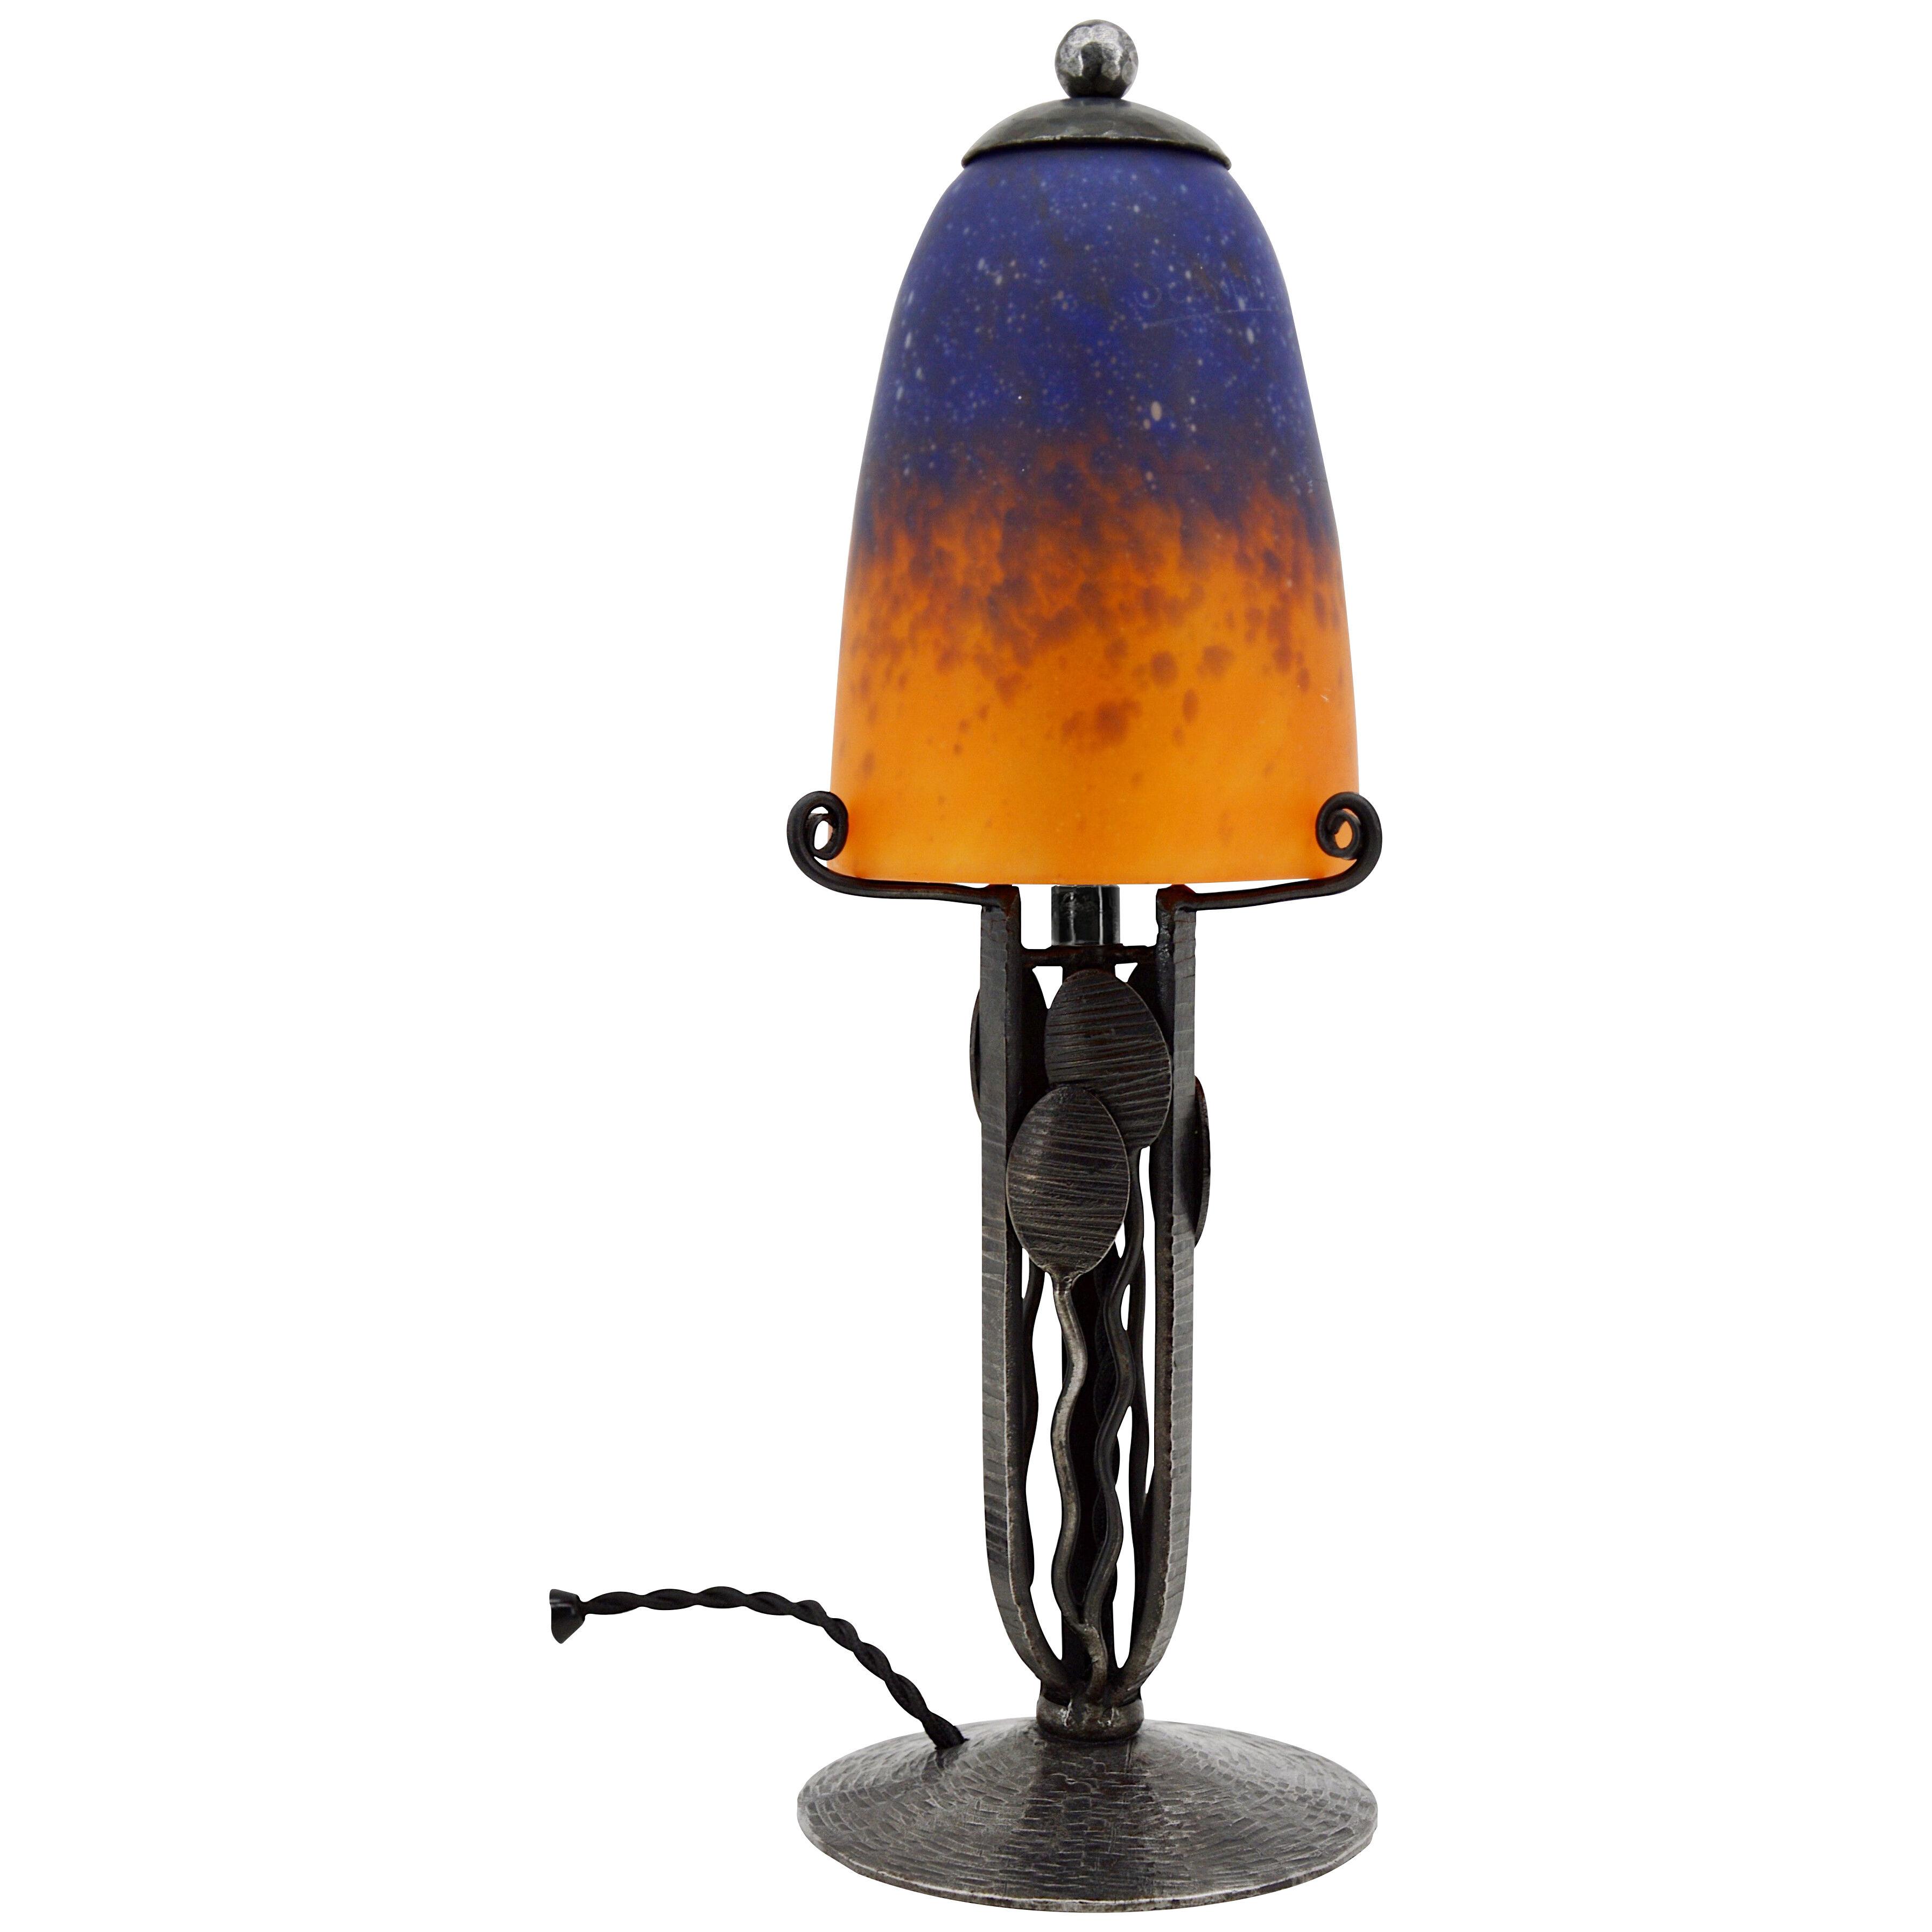 Charles Schneider French Art Deco Table Lamp, 1924-1928